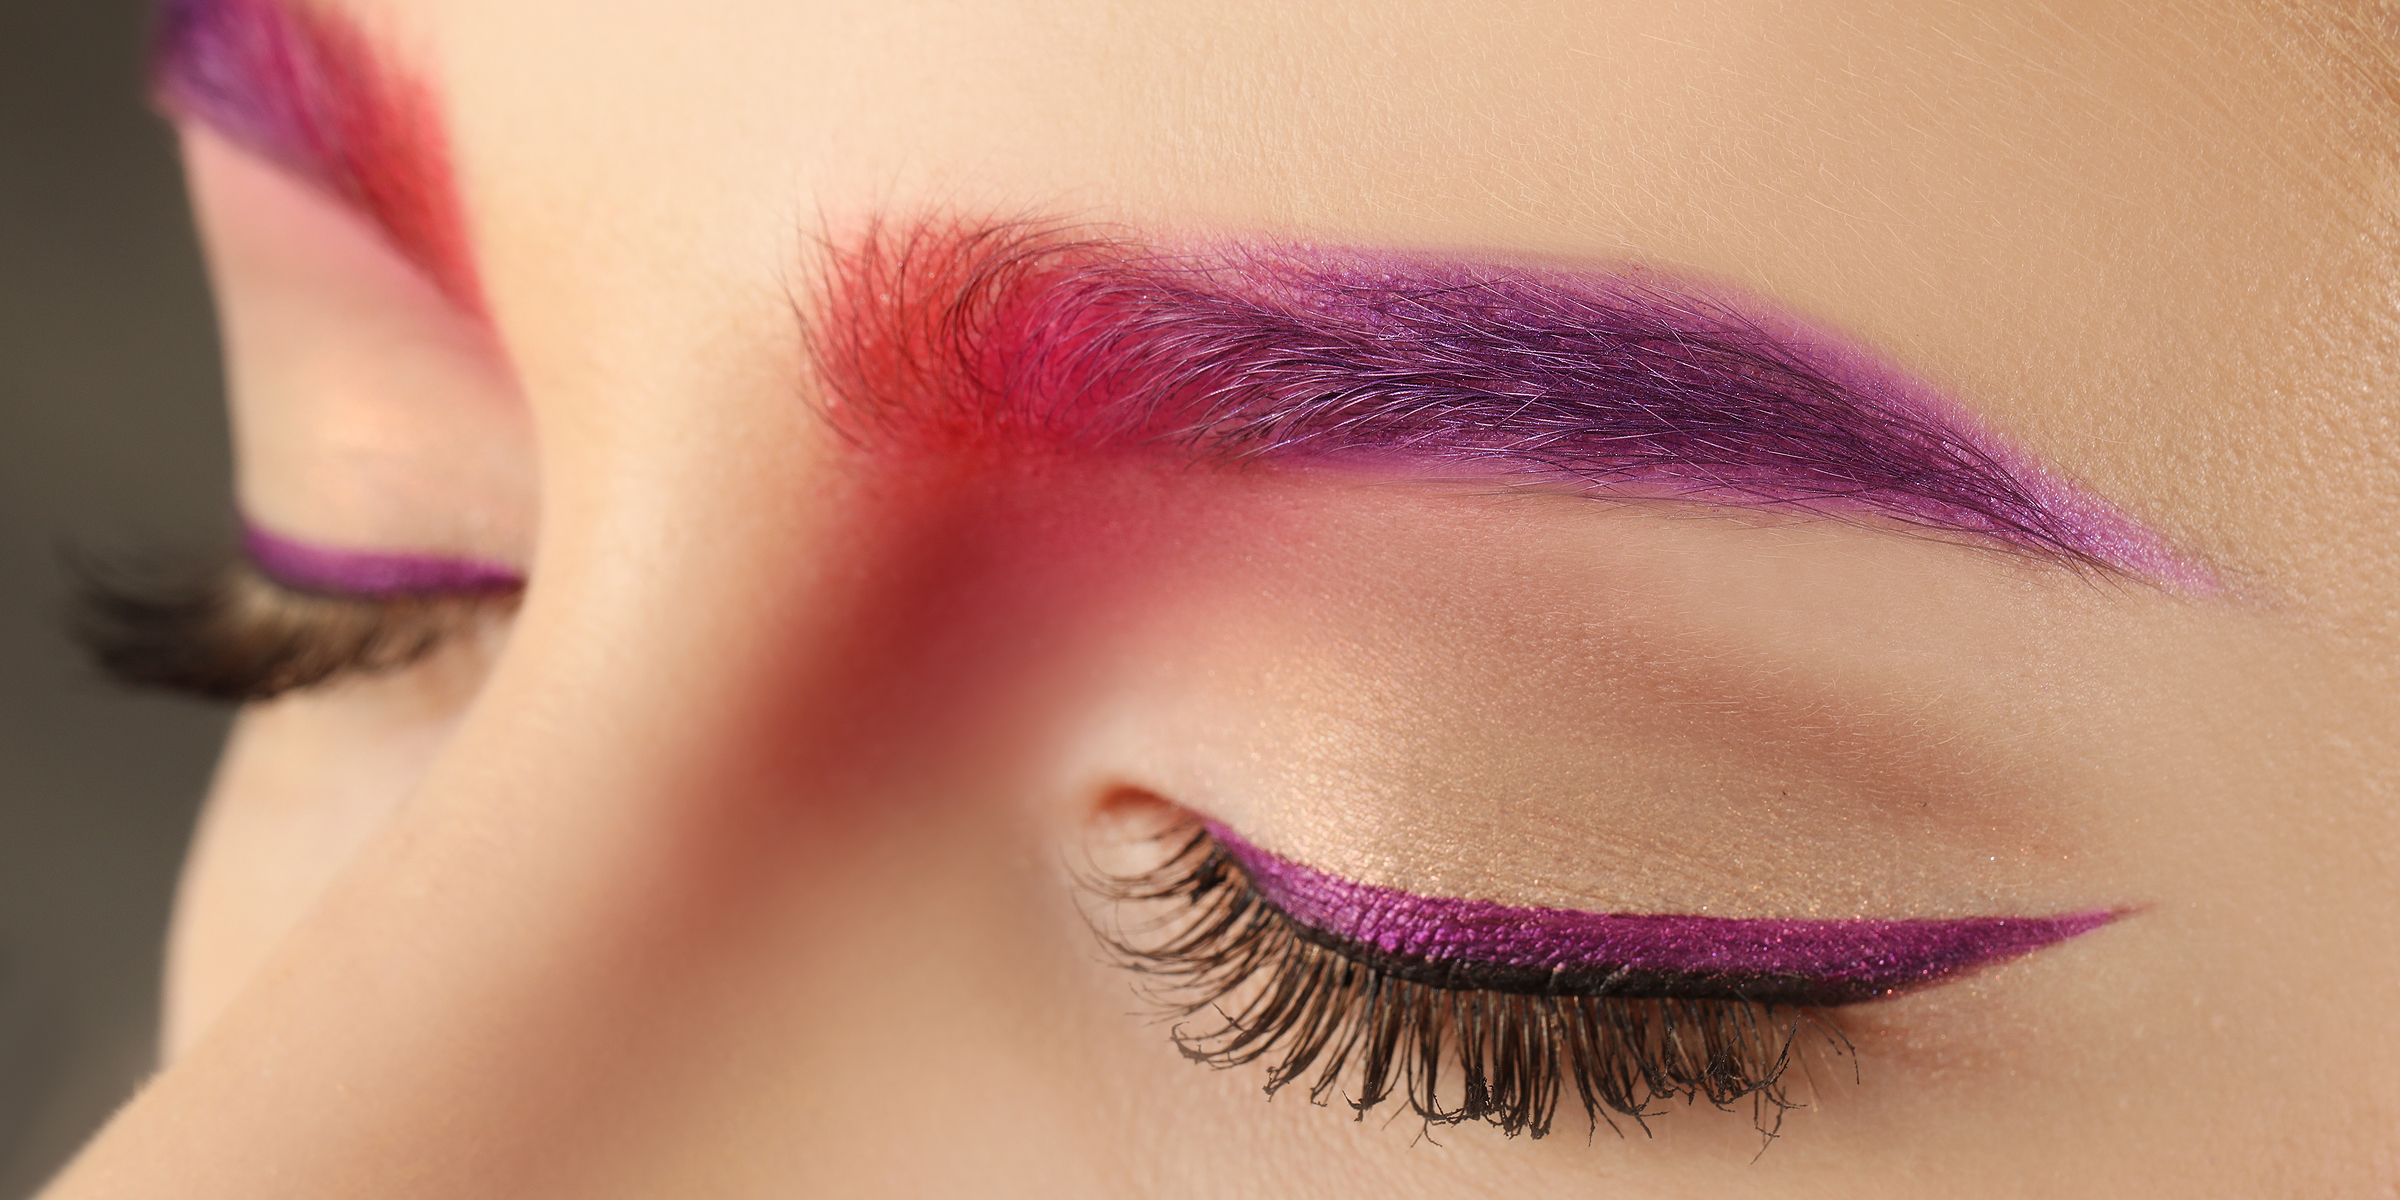 Photo of colored eyebrows | Source: Shutterstock